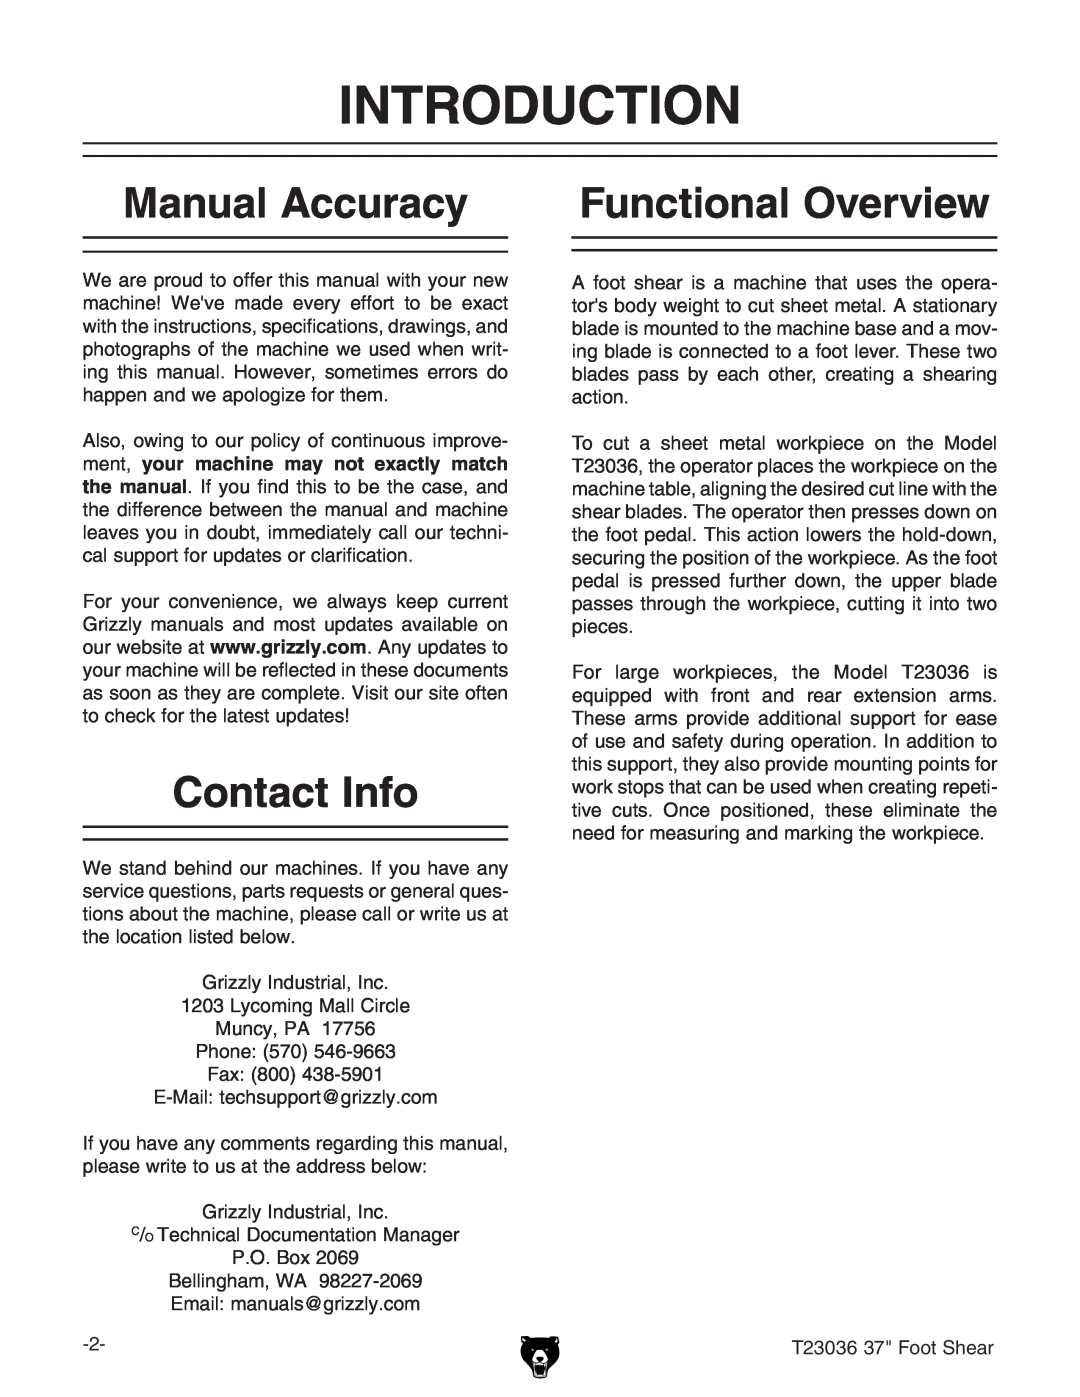 Grizzly T23036 owner manual Introduction, Manual Accuracy, Functional Overview, Contact Info 